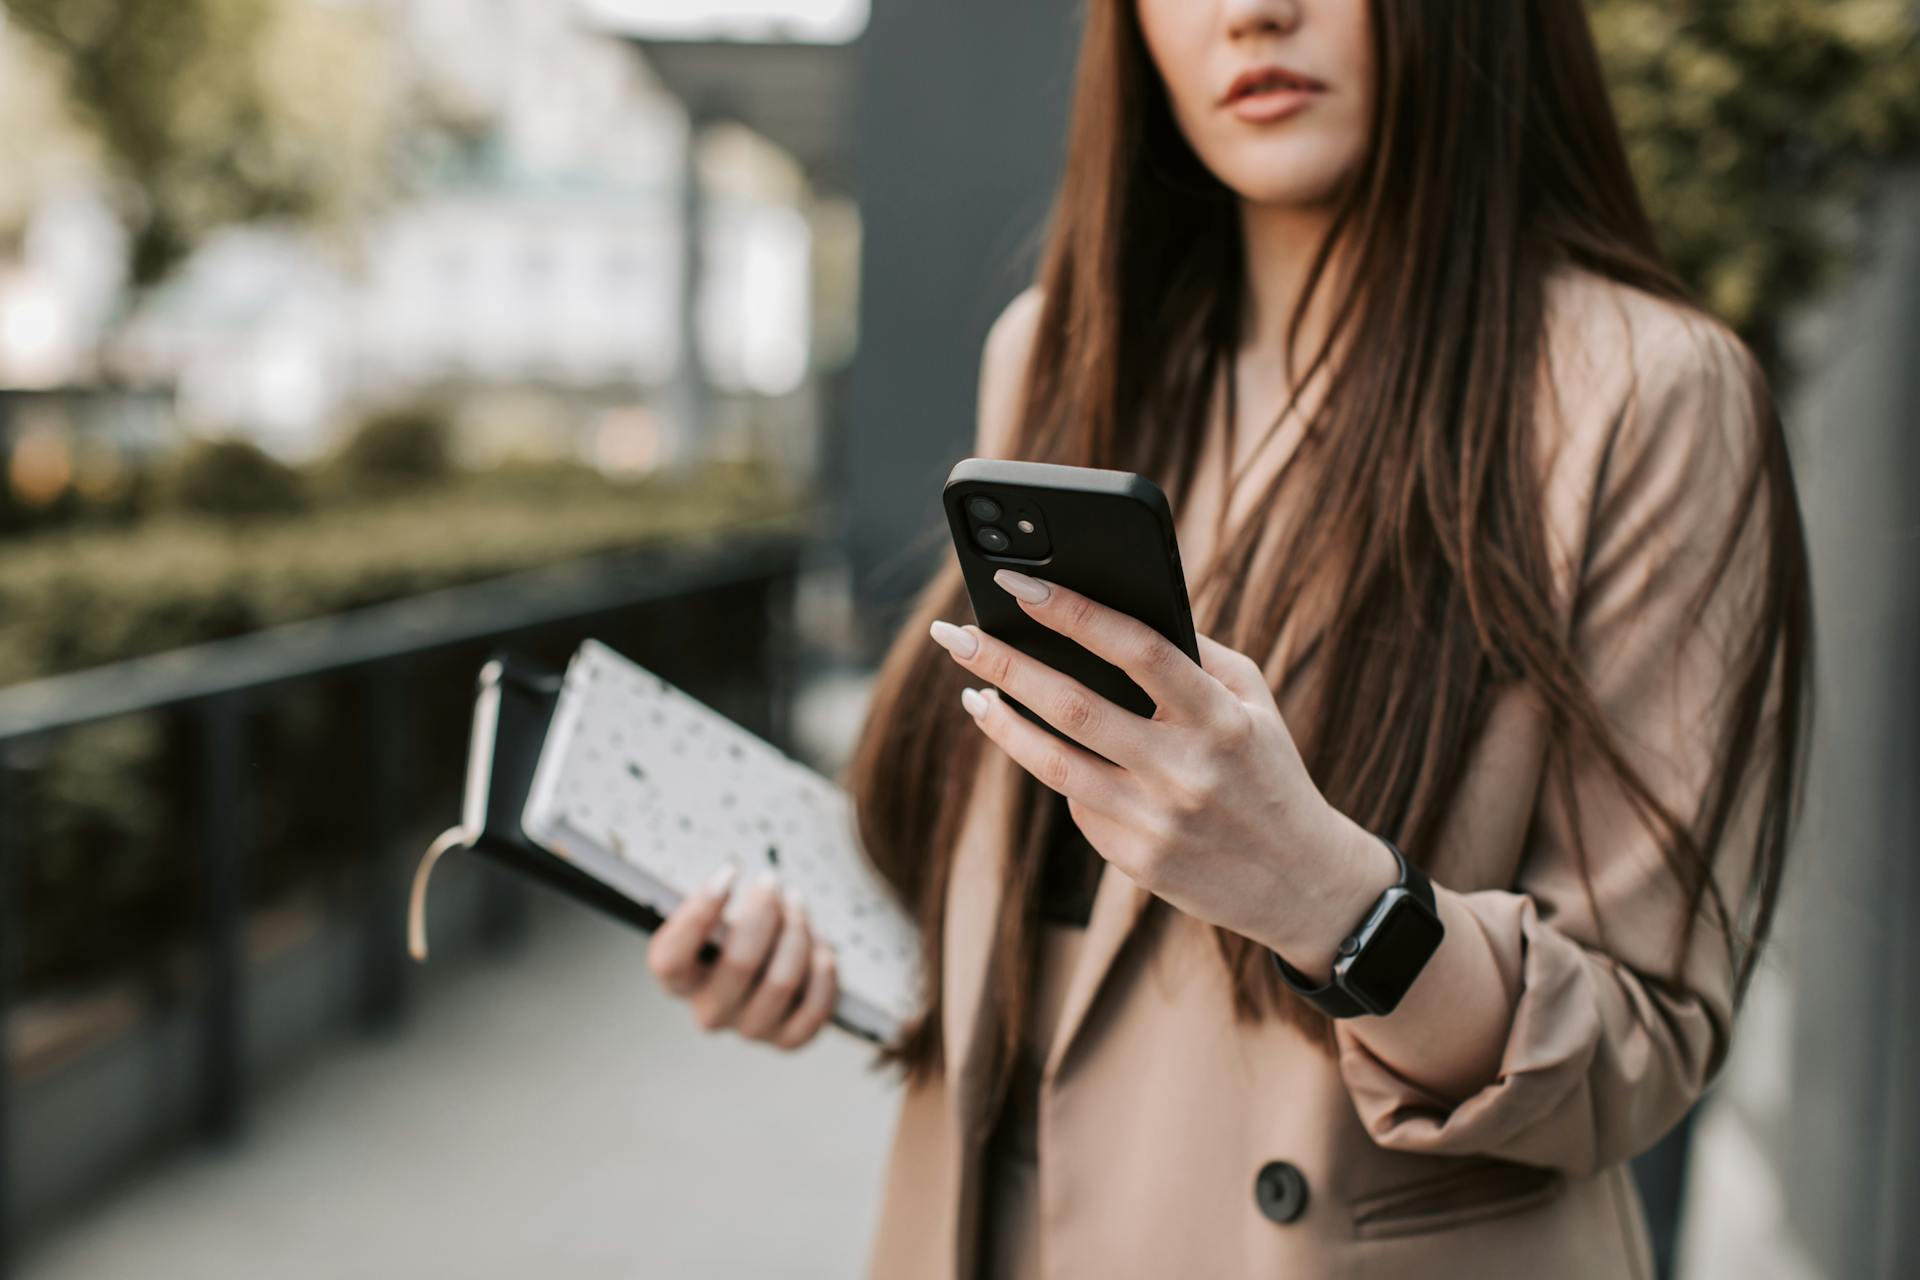 A woman holding a cell phone | Source: Pexels